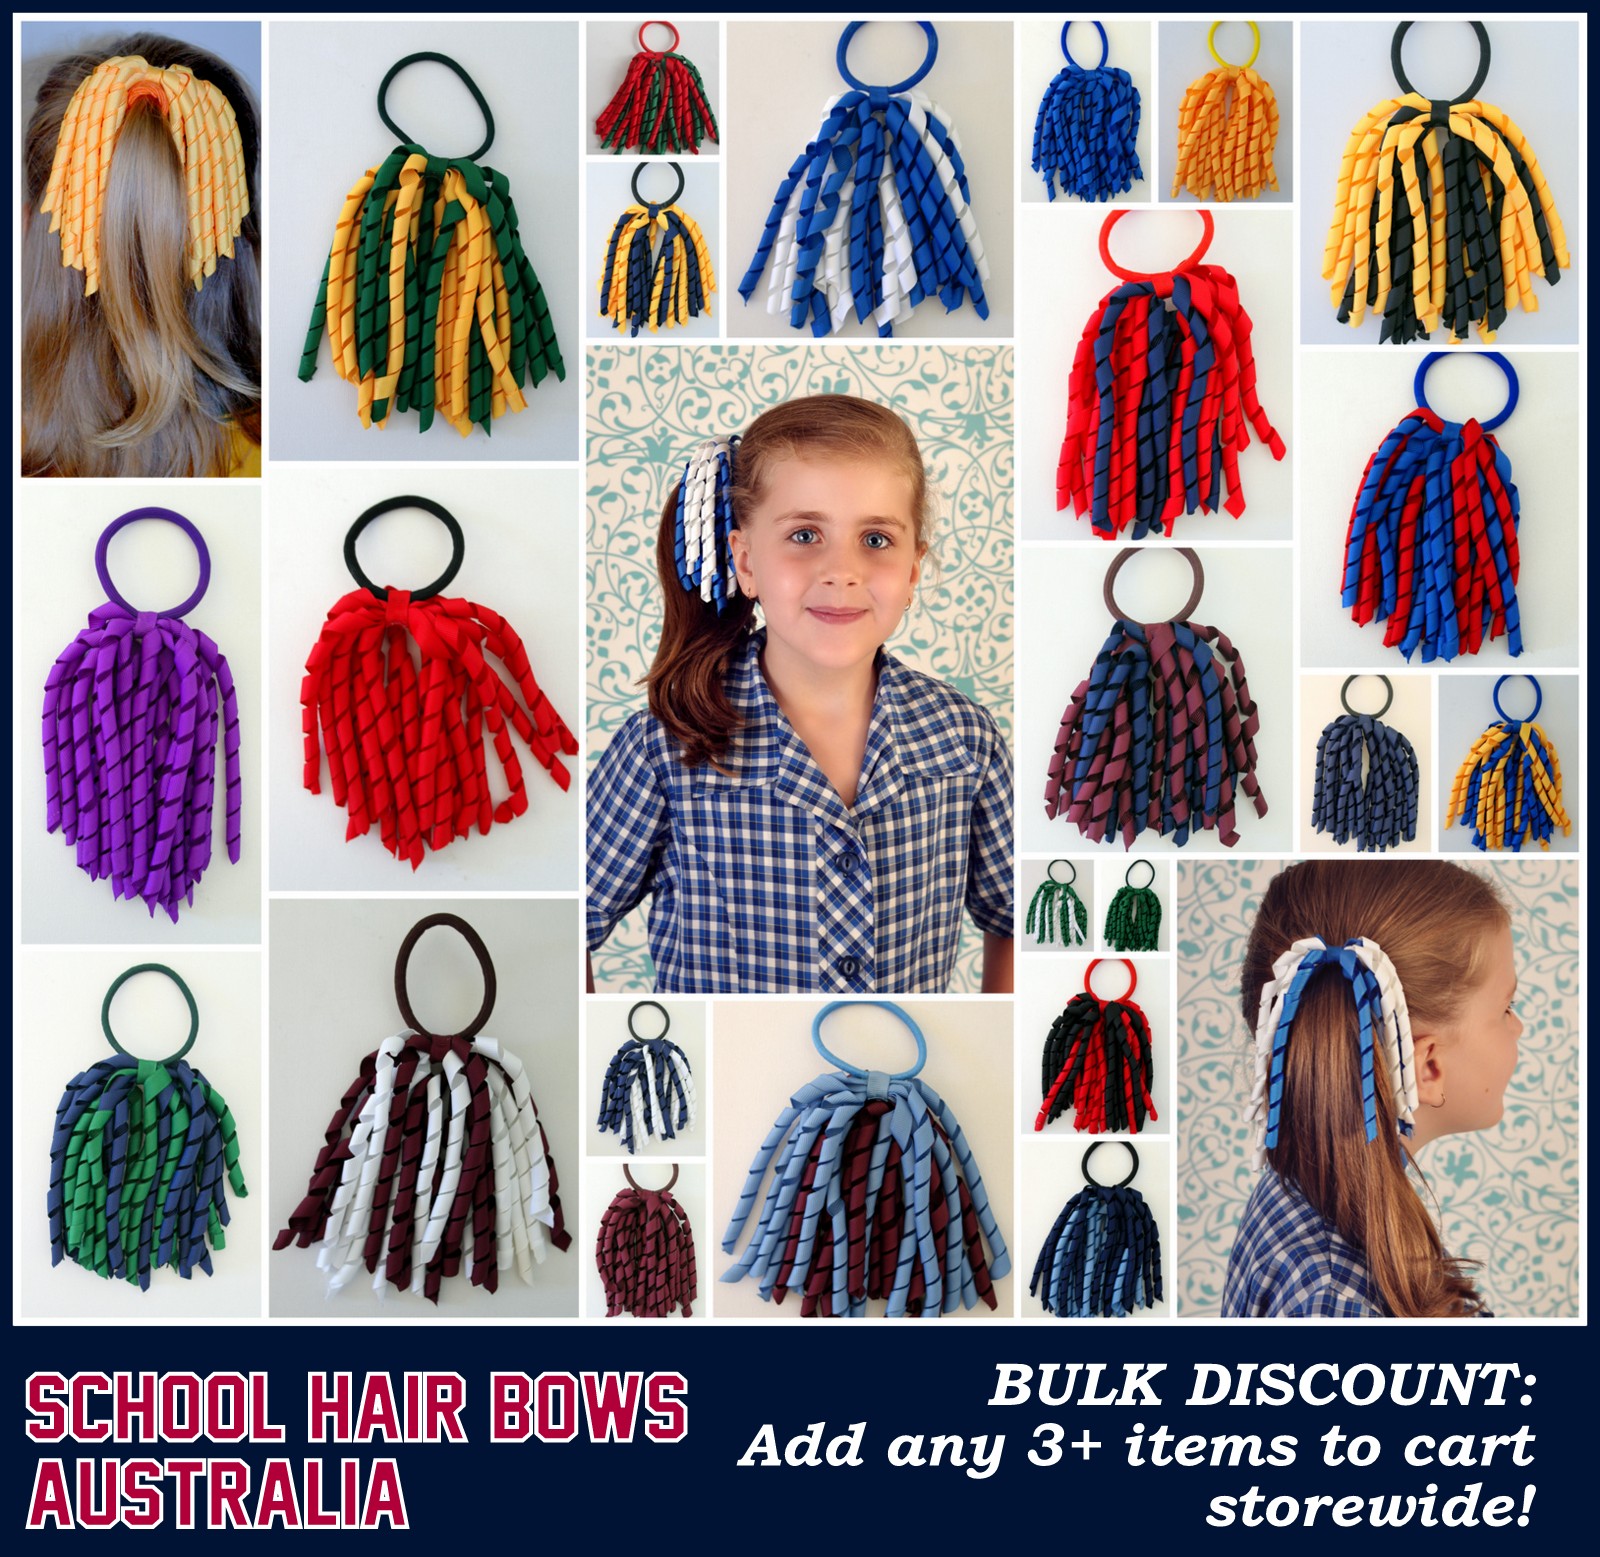 Image of Ponytails with hair accessories for school pictures